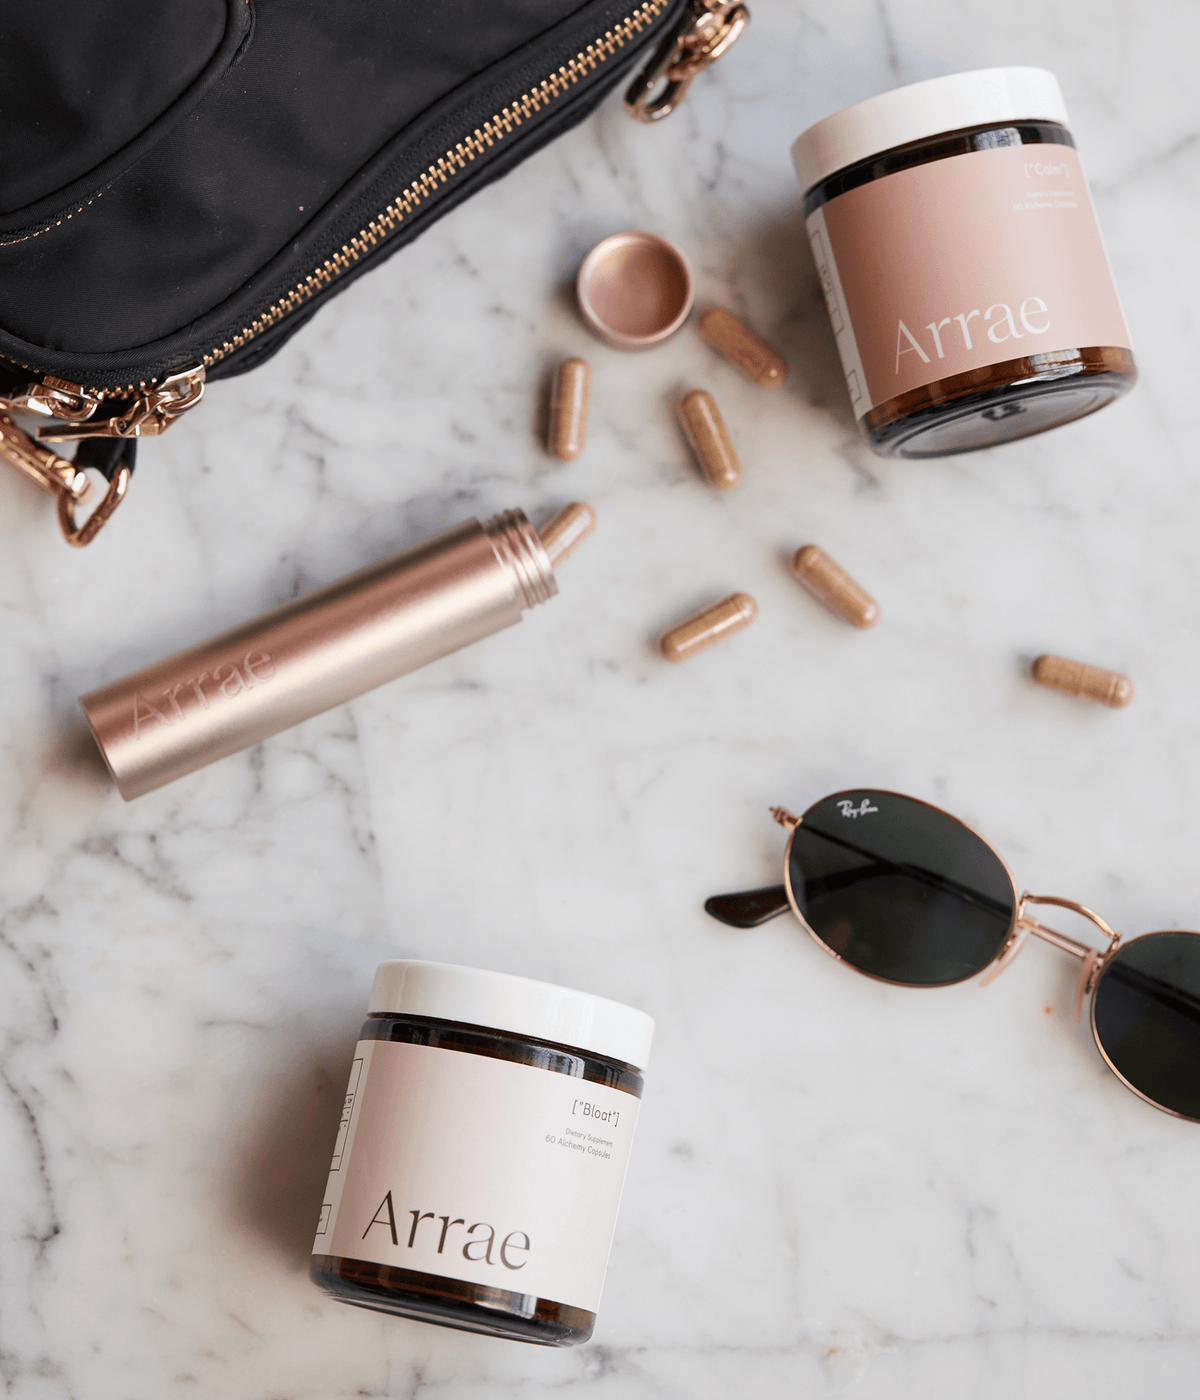 Arrae Bloat Capsules, Calm Capsules, & Carry-on Capsule Case laying next to purse and sunglasses